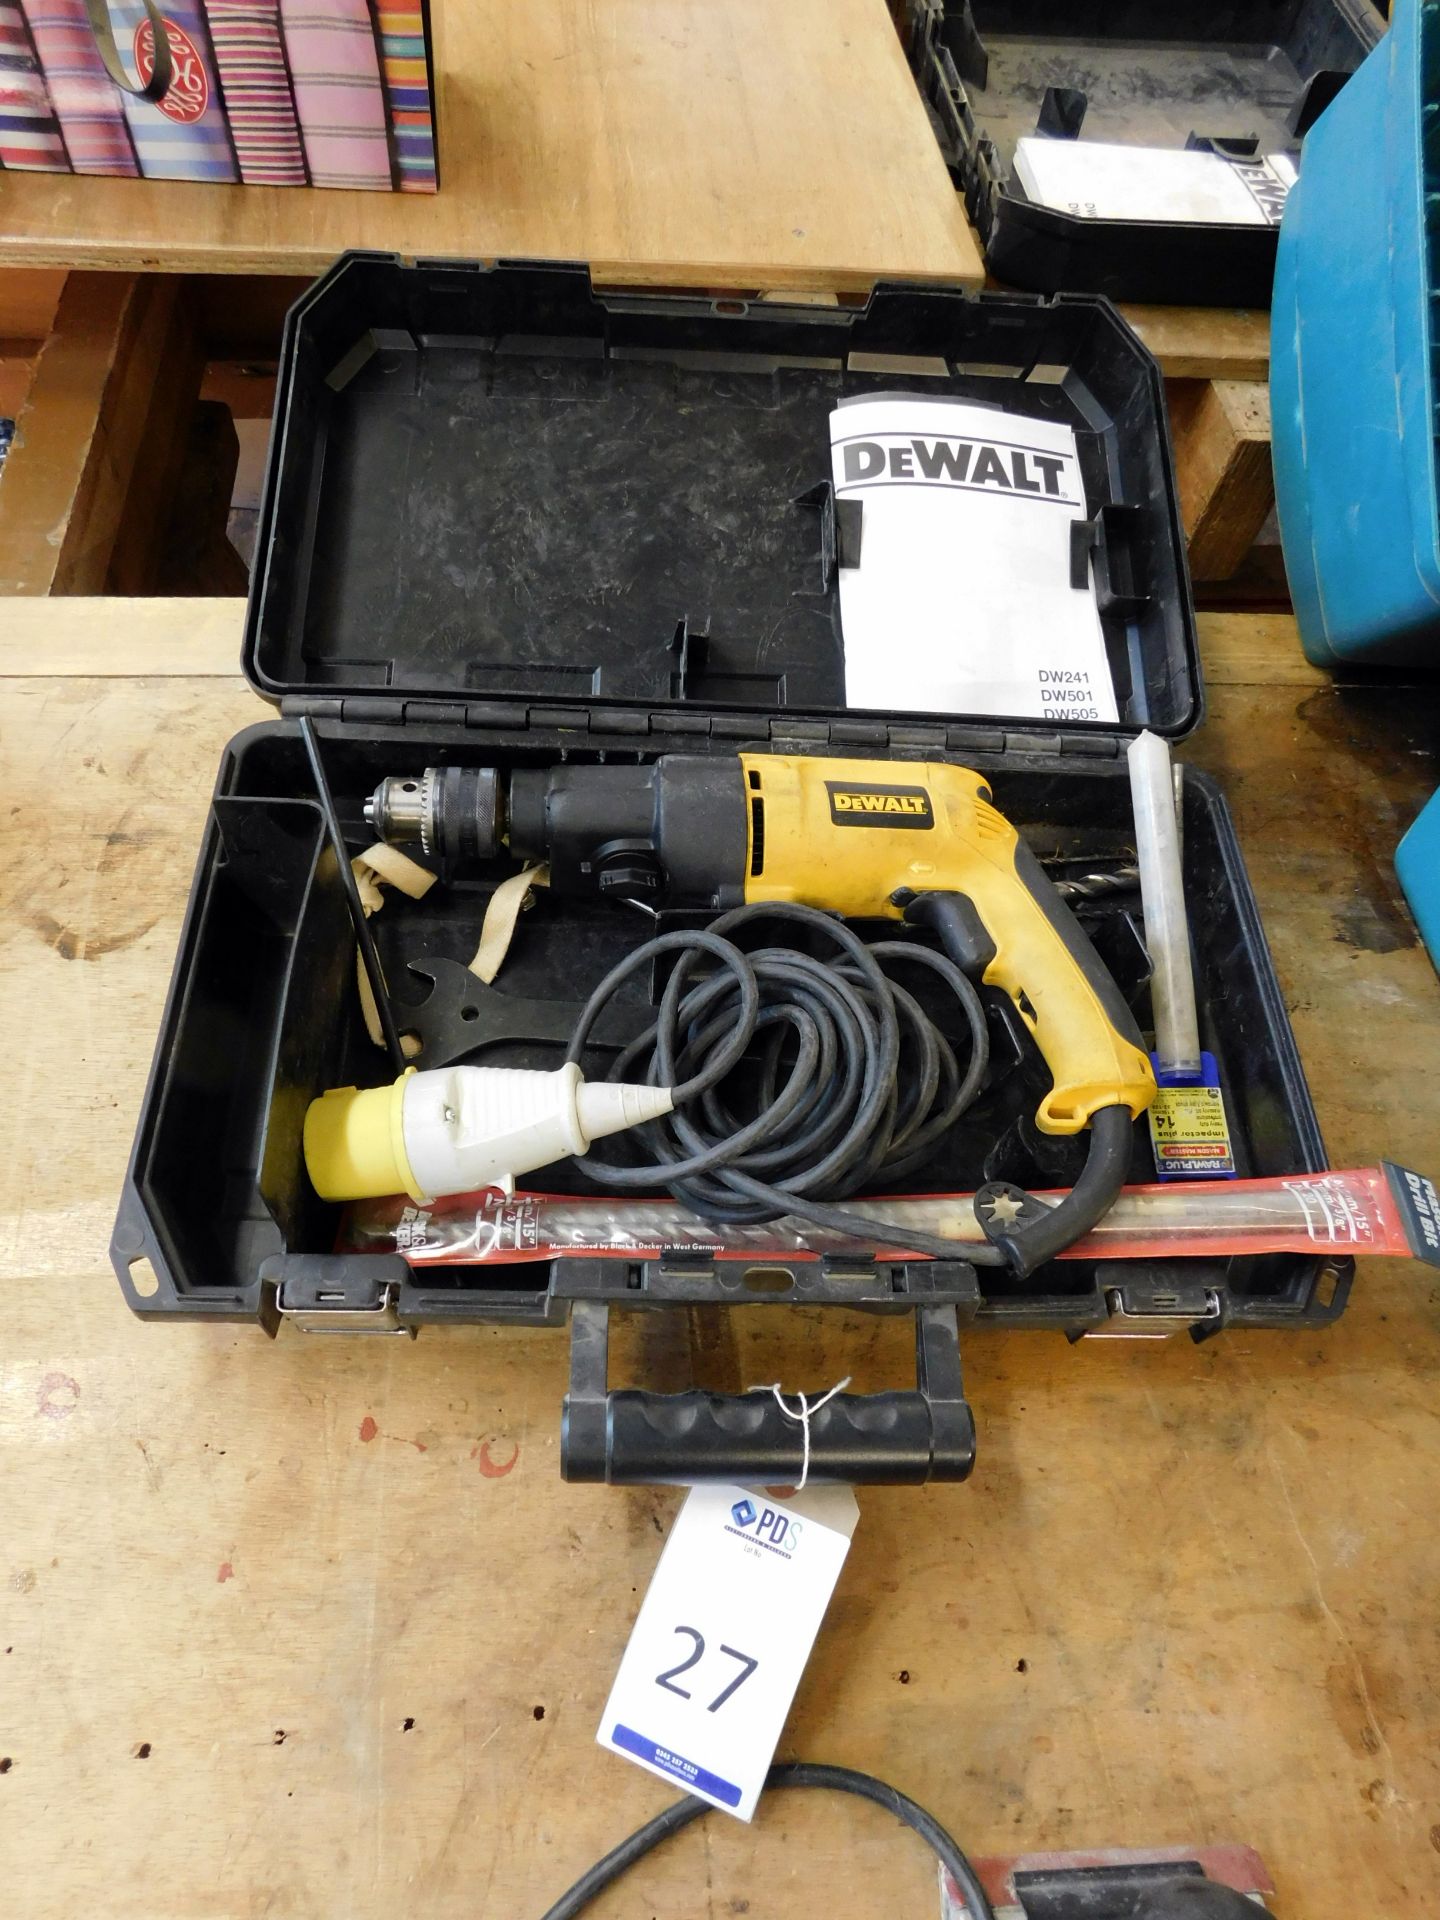 Dewalt DW505L Hammer Drill, 110v (Located Bethnal Green – Please see General Notes for More Detail)